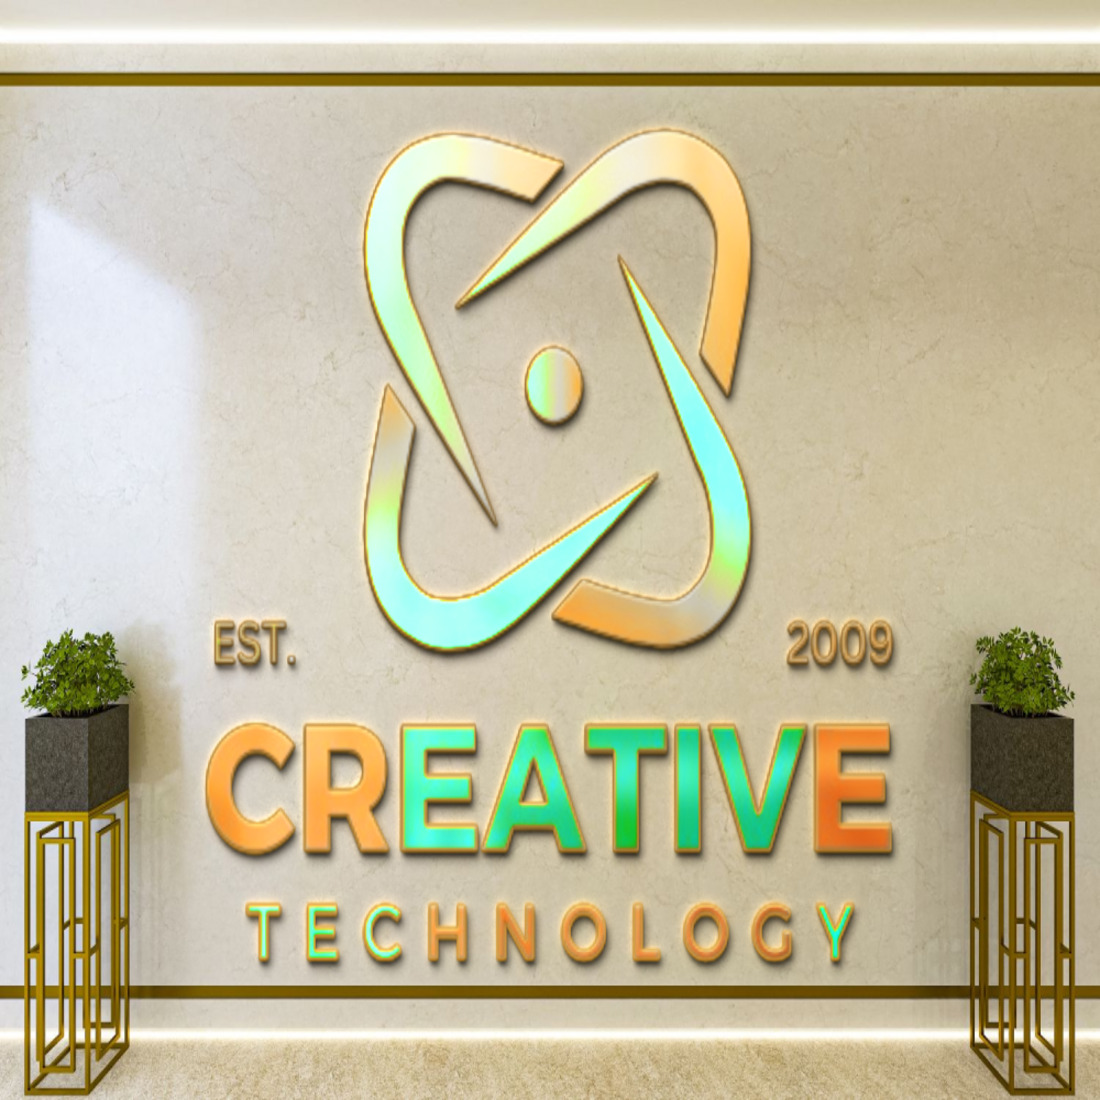 3D logo of creative technology preview image.